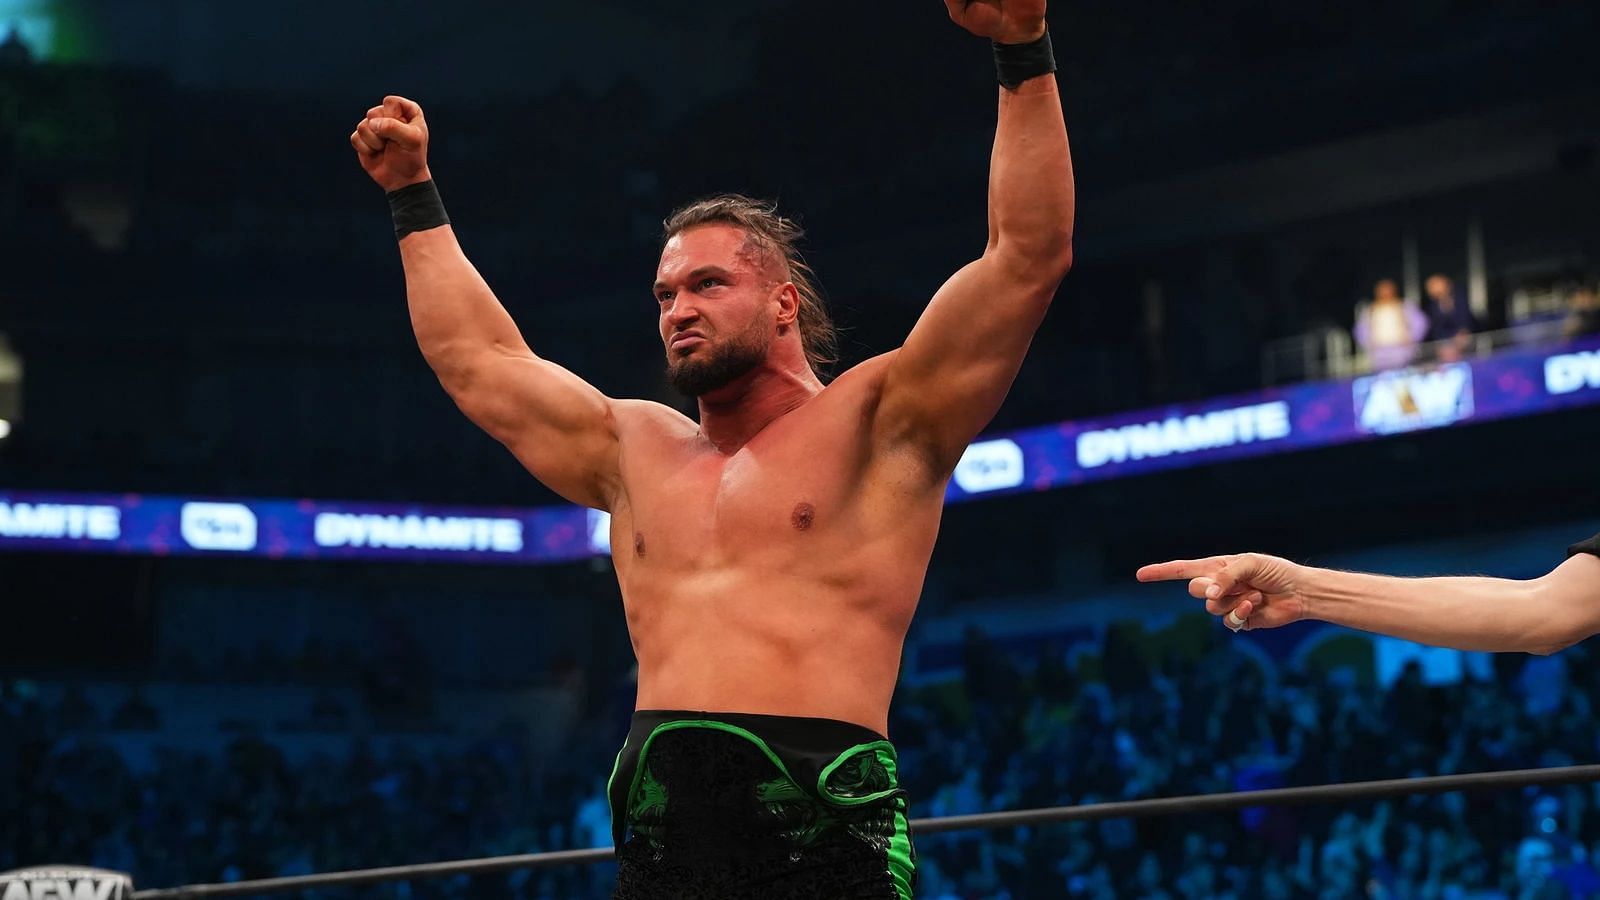 The War Dog is tearing his way through AEW!